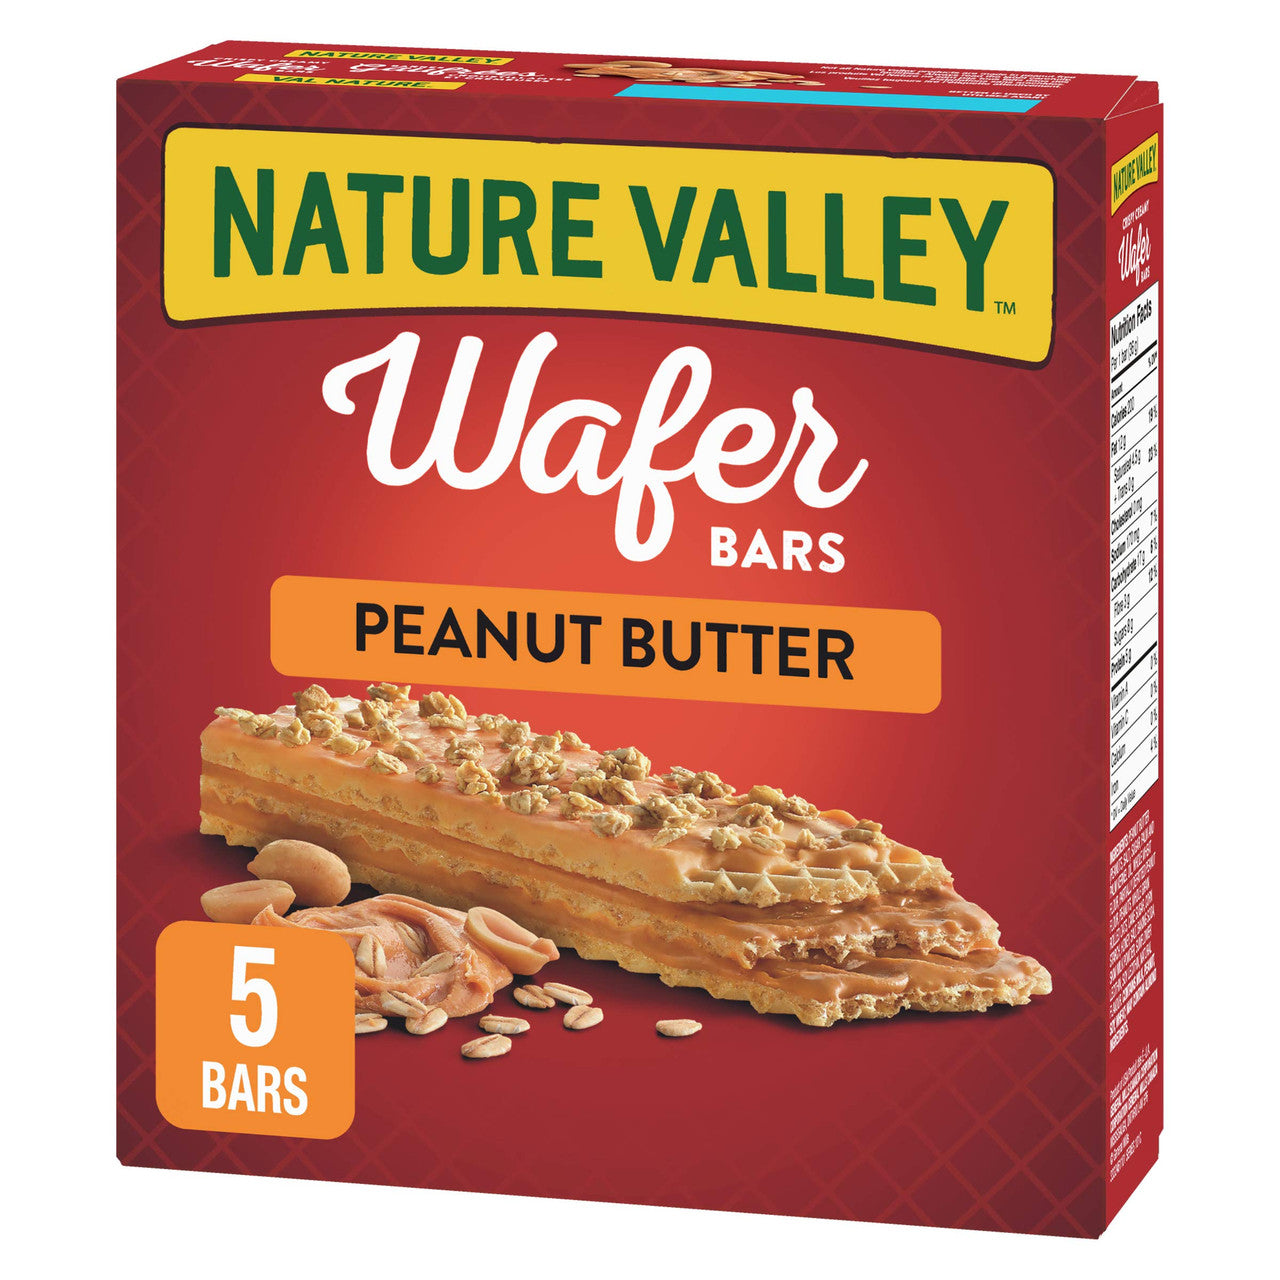 NATURE VALLEY Crispy Creamy Wafer Bars, Peanut Butter, 5 Count per box, 184g/6.5 oz., {Imported from Canada}